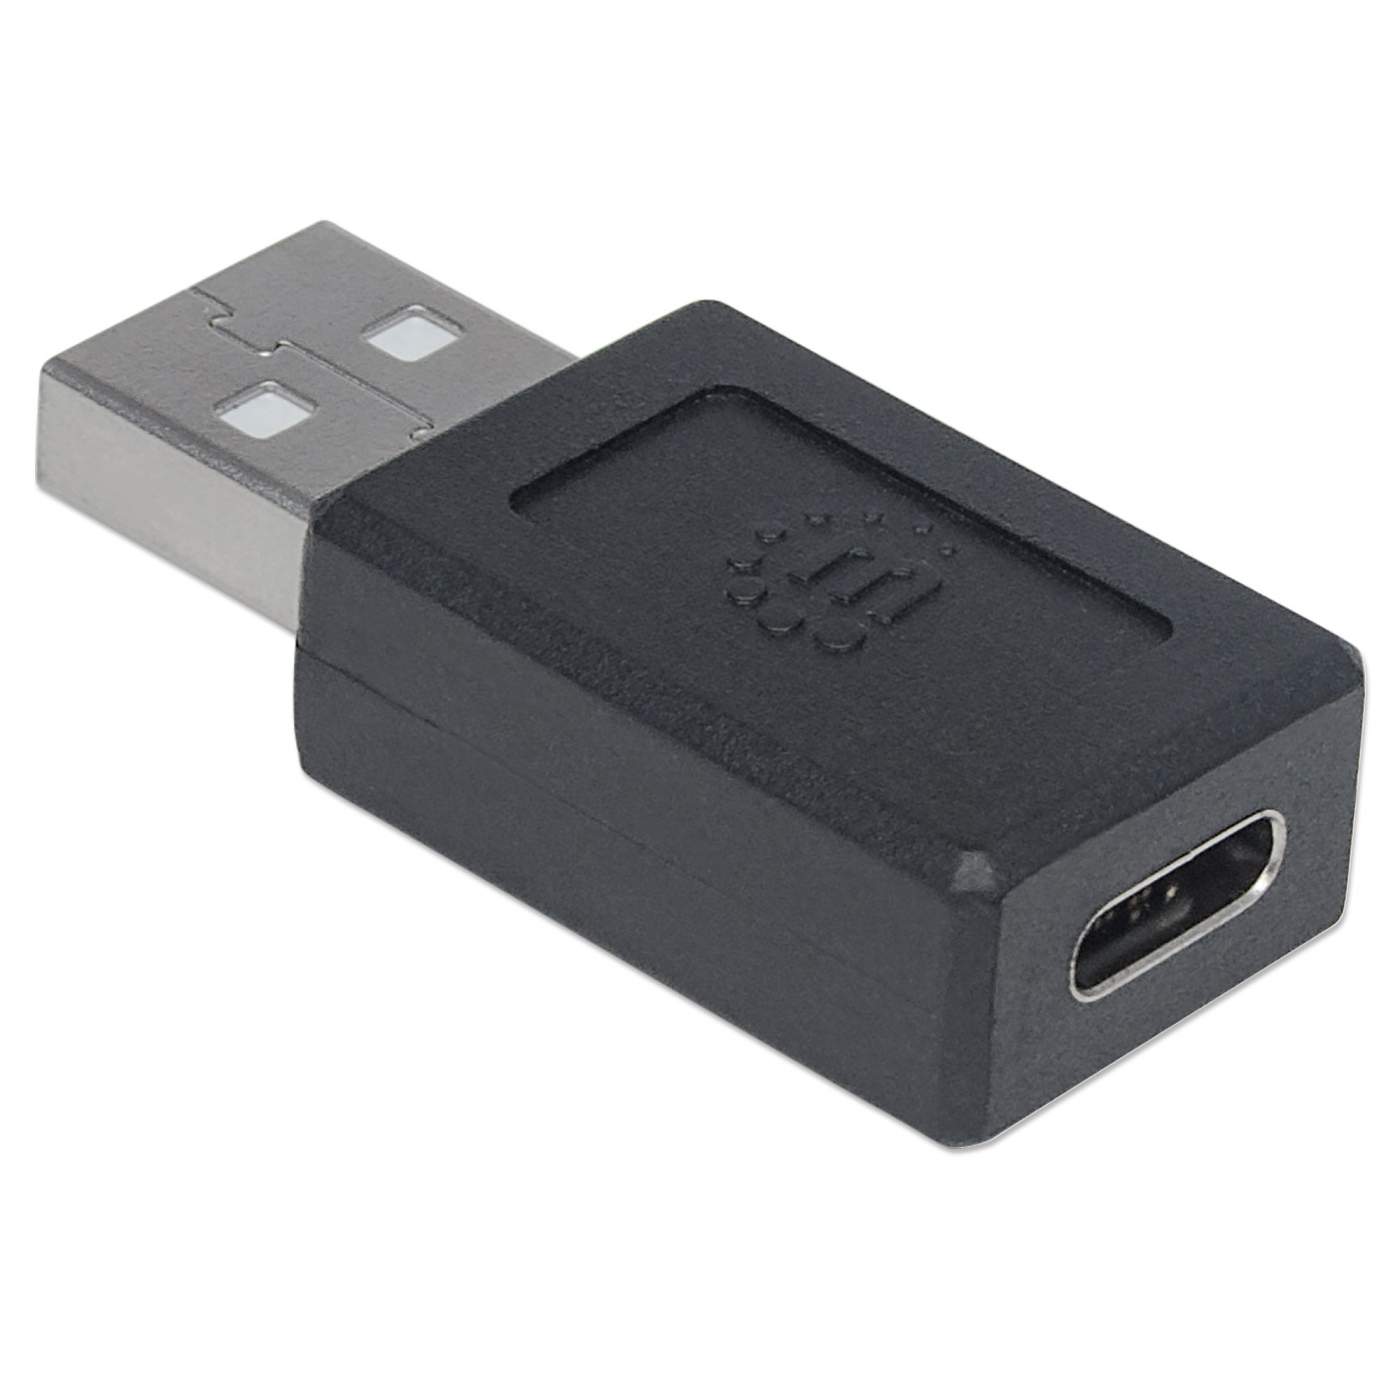 USB 2.0 Type-C to Type-A Adapter Image 6